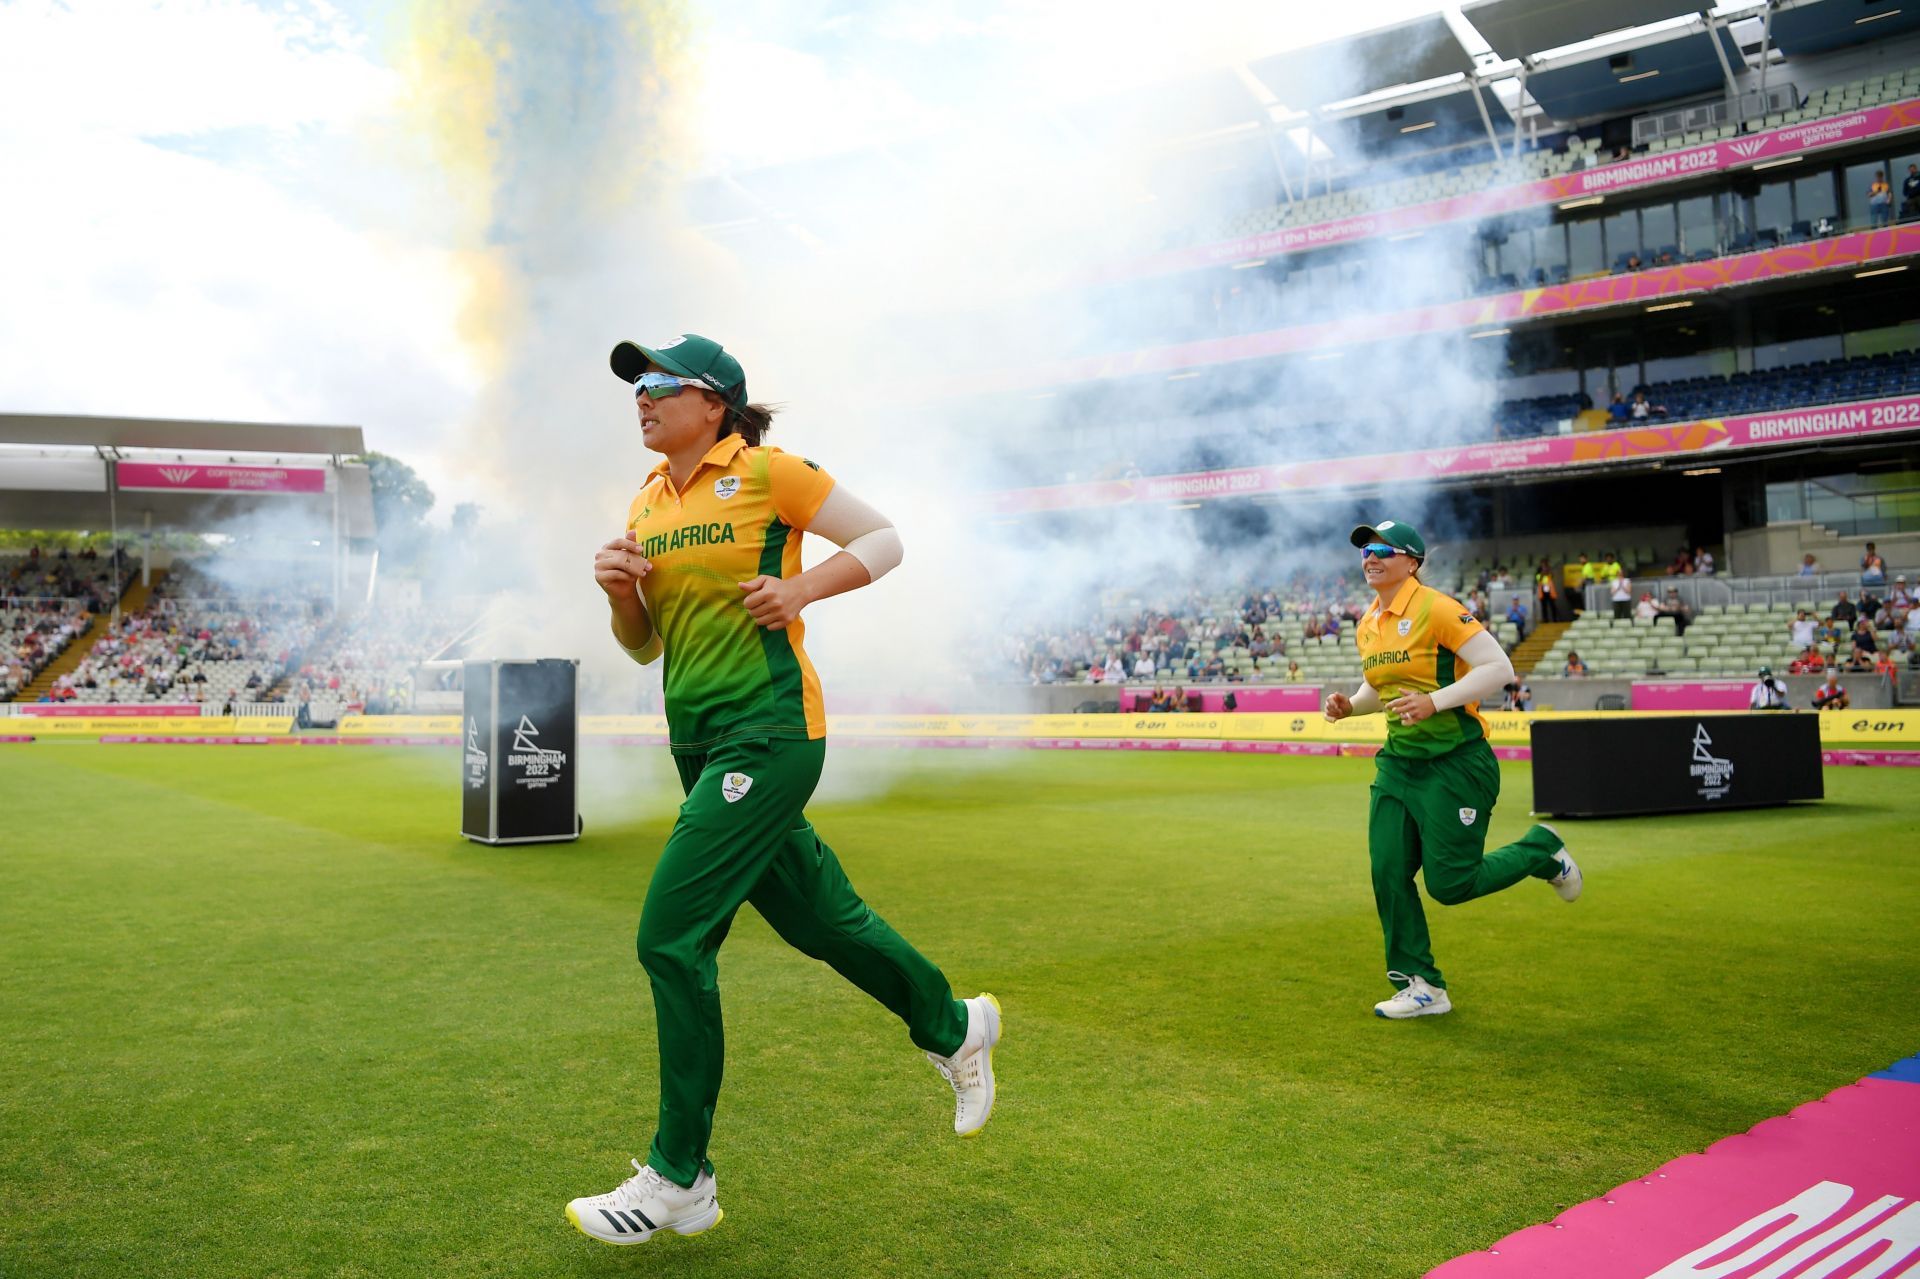 Cricket - Commonwealth Games: Day 5 (Image courtesy: Getty)